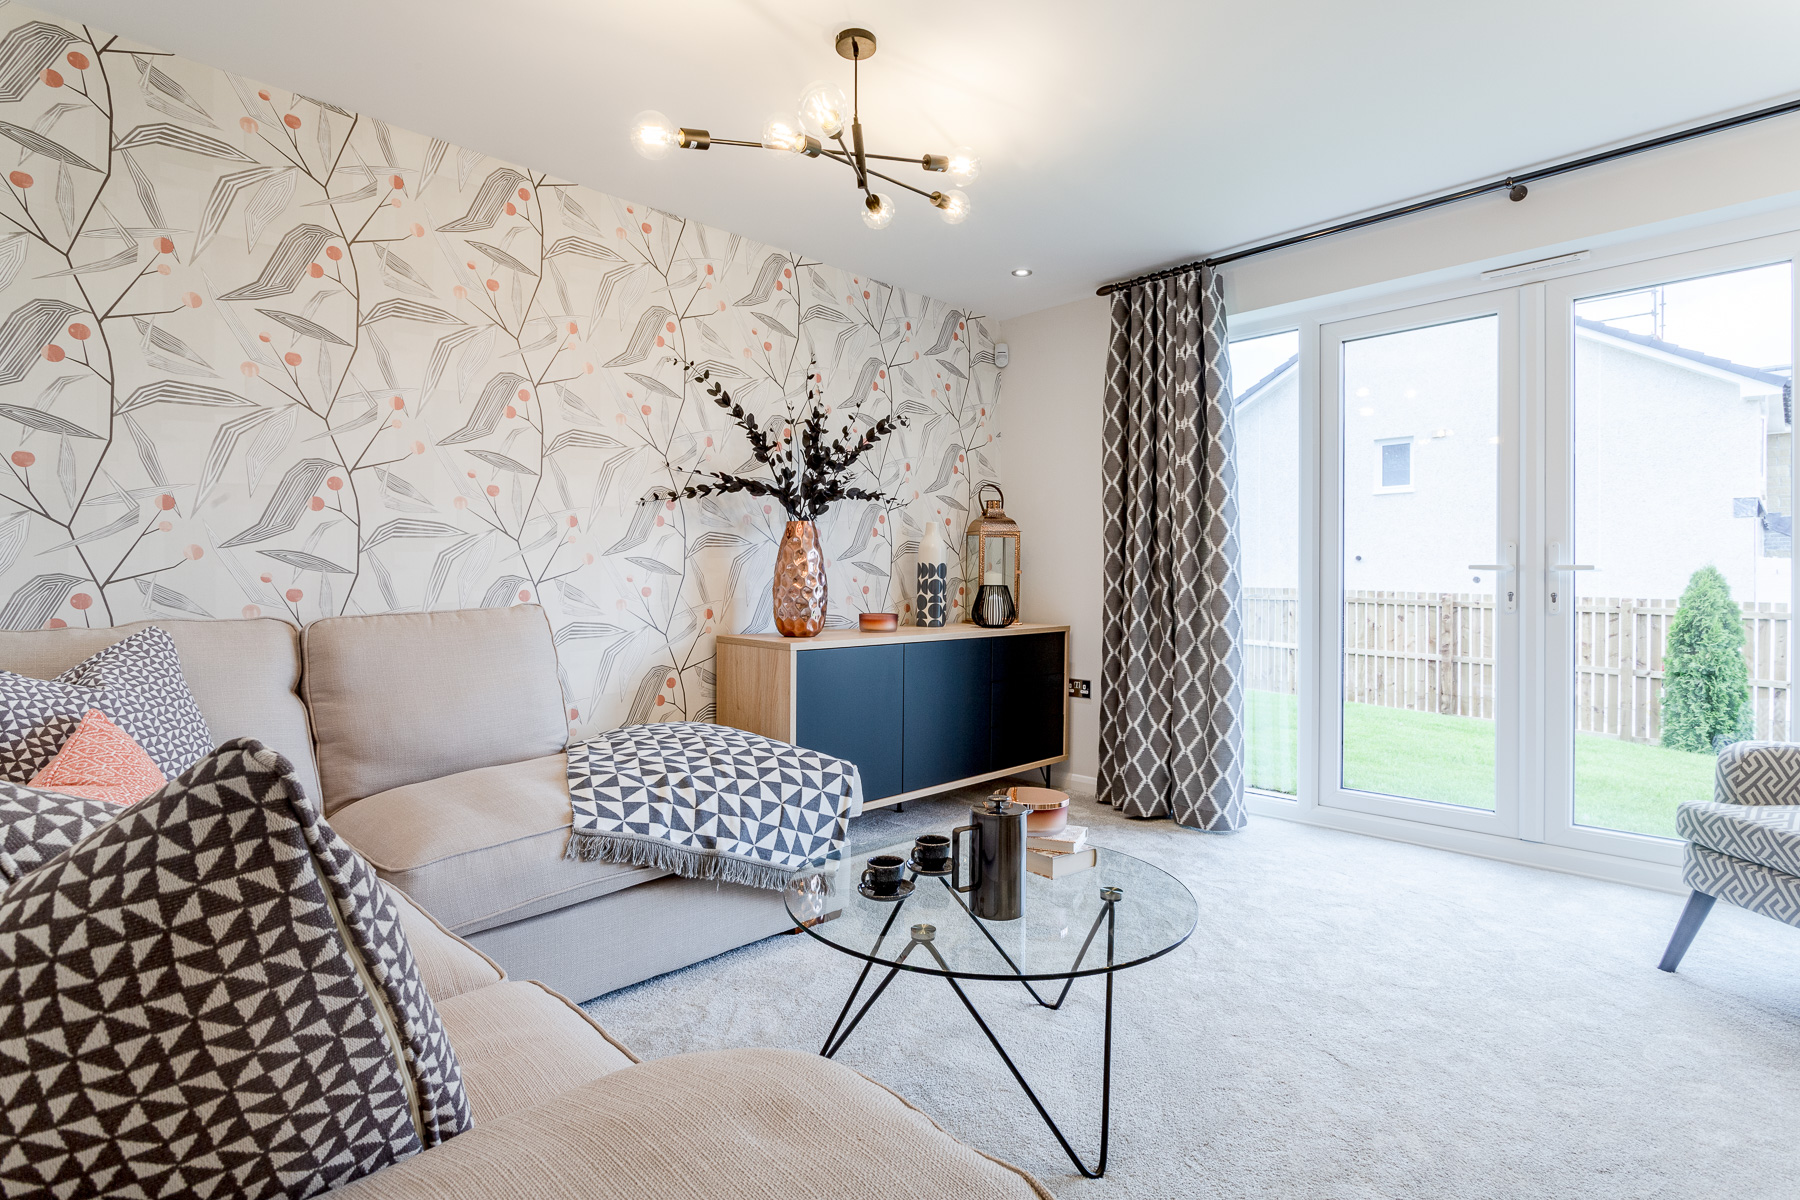 The Baxter 3 bedroom home Taylor Wimpey